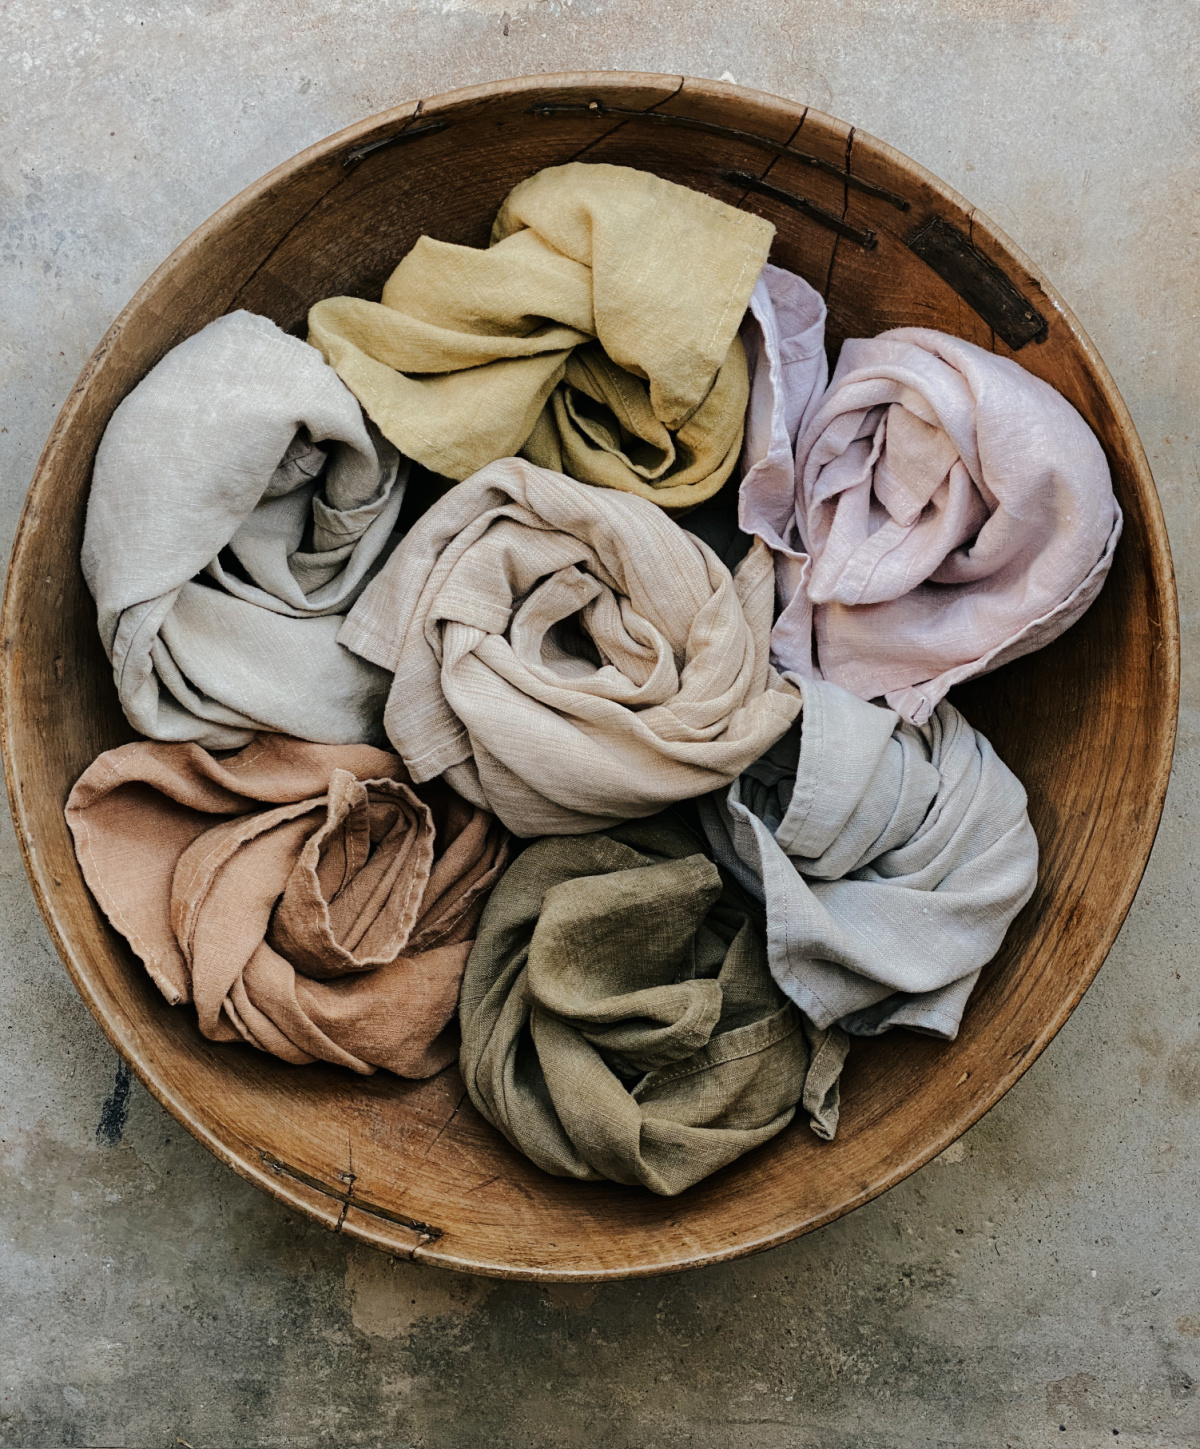 wooden bowl filled with herbal dyed cloths